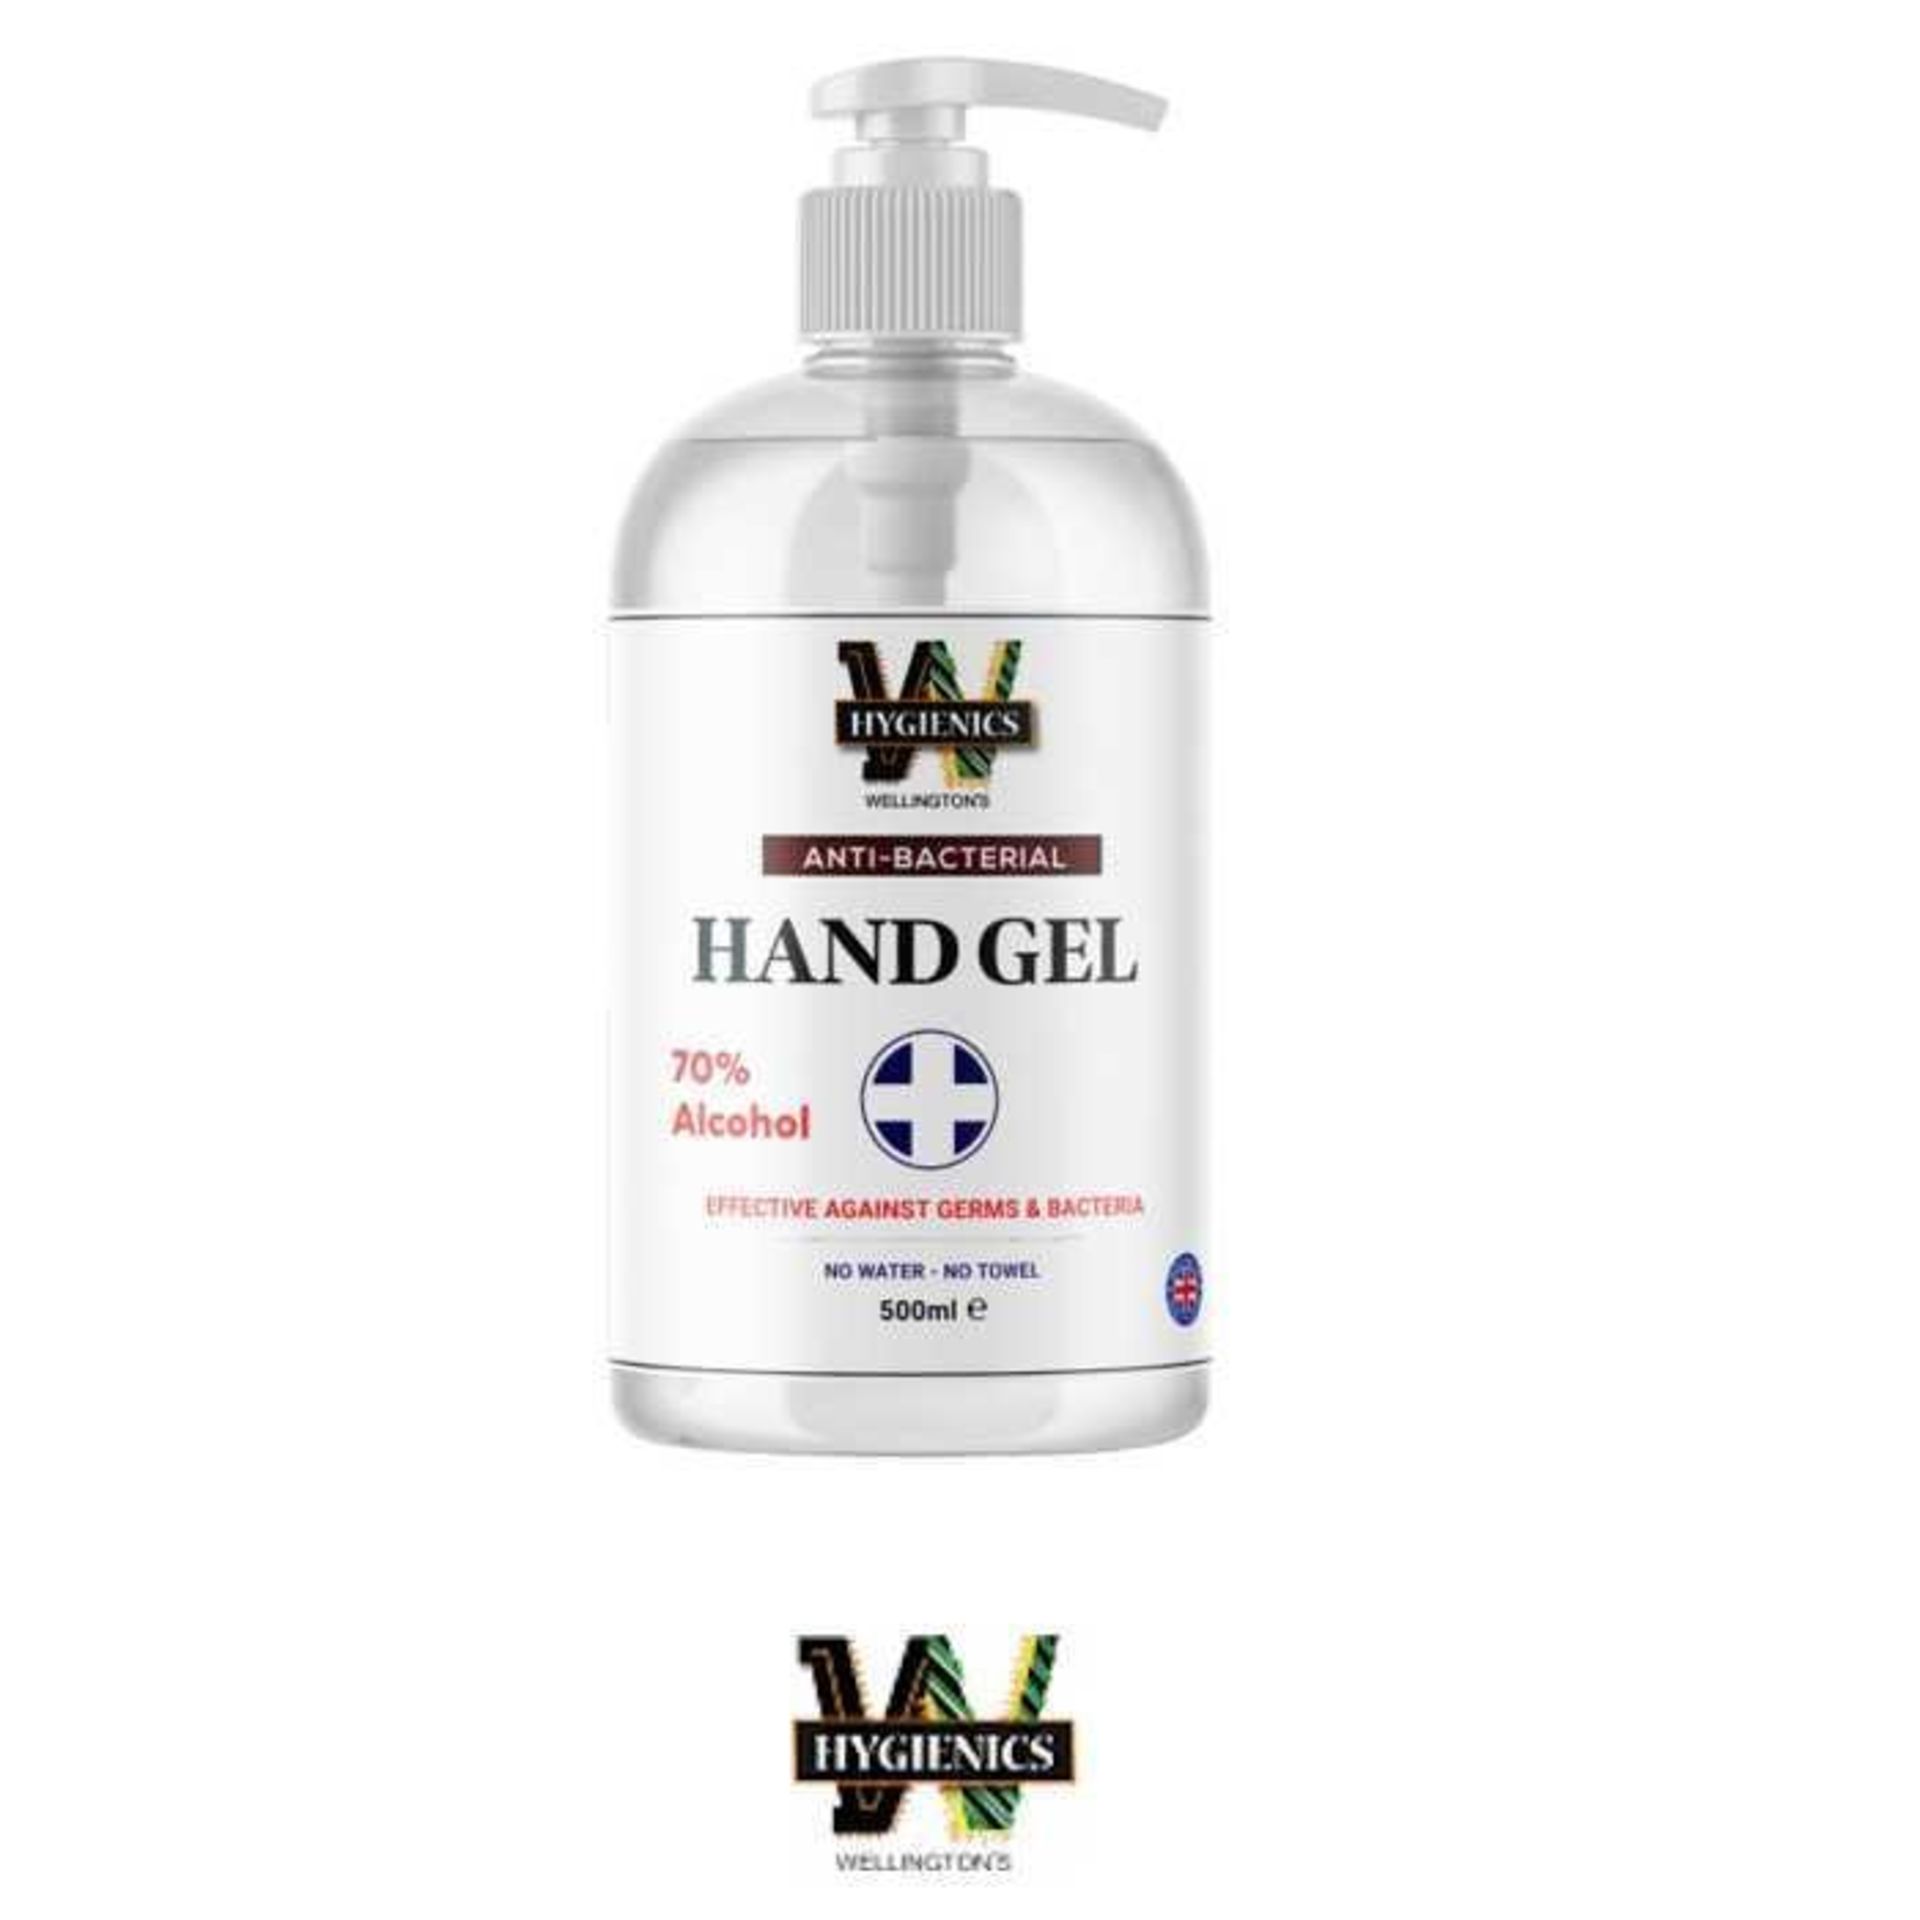 RRP £350 Box To Contain 35 Brand-New Bottles Of 500Ml Wellingtons Hand Sanitizer Gel